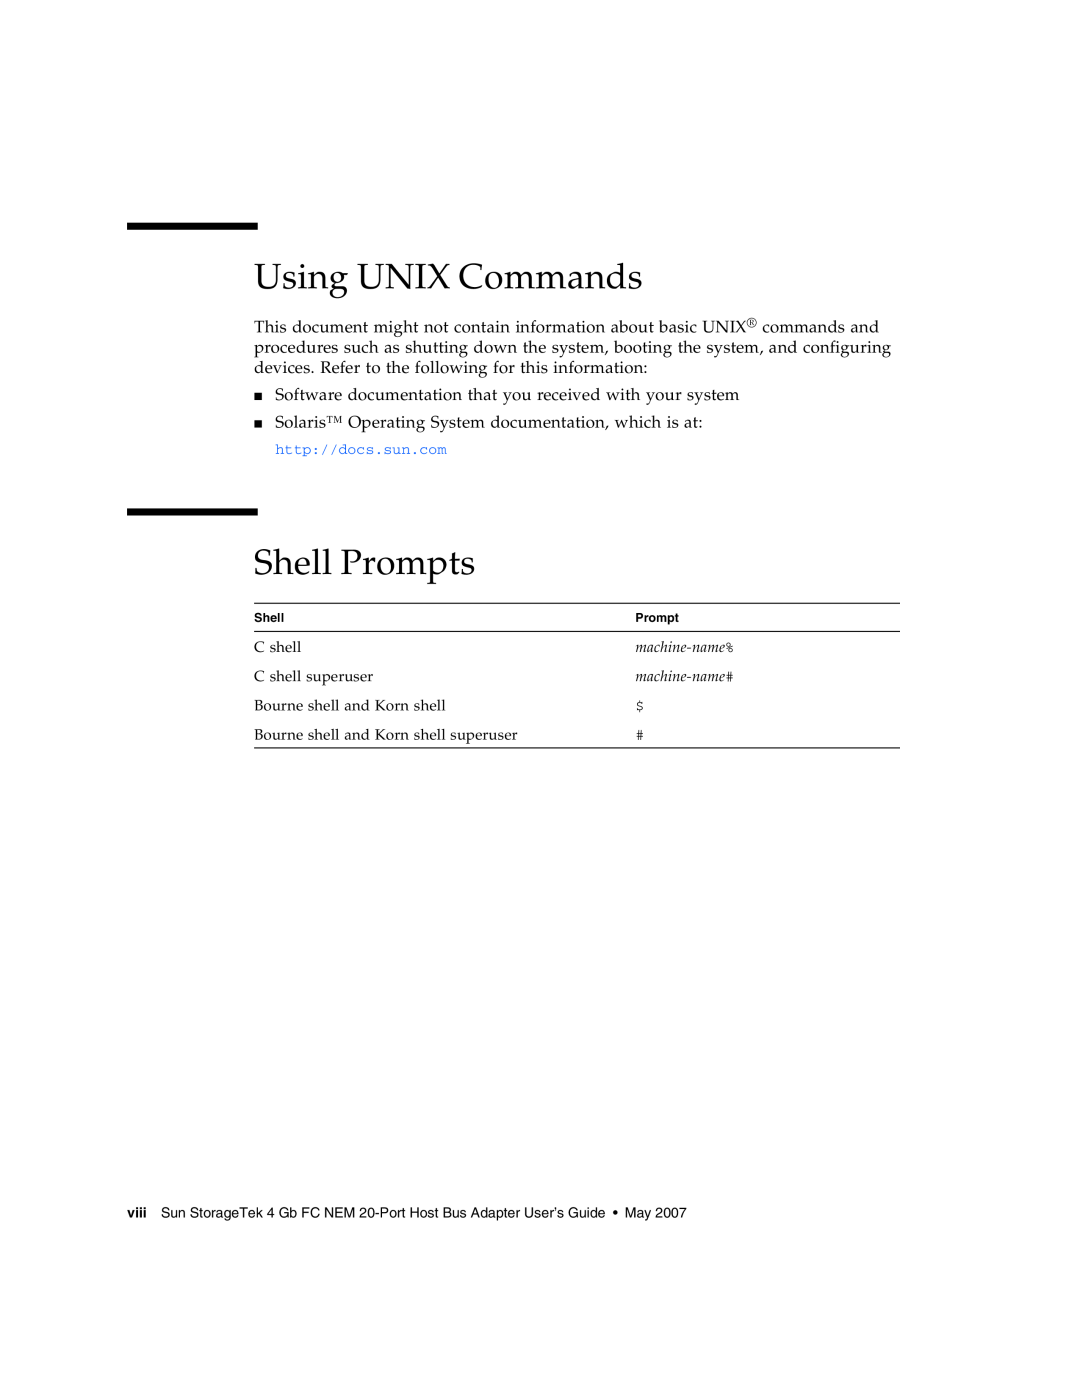 Sun Microsystems 2.0 manual Using UNIX Commands, Shell Prompts 